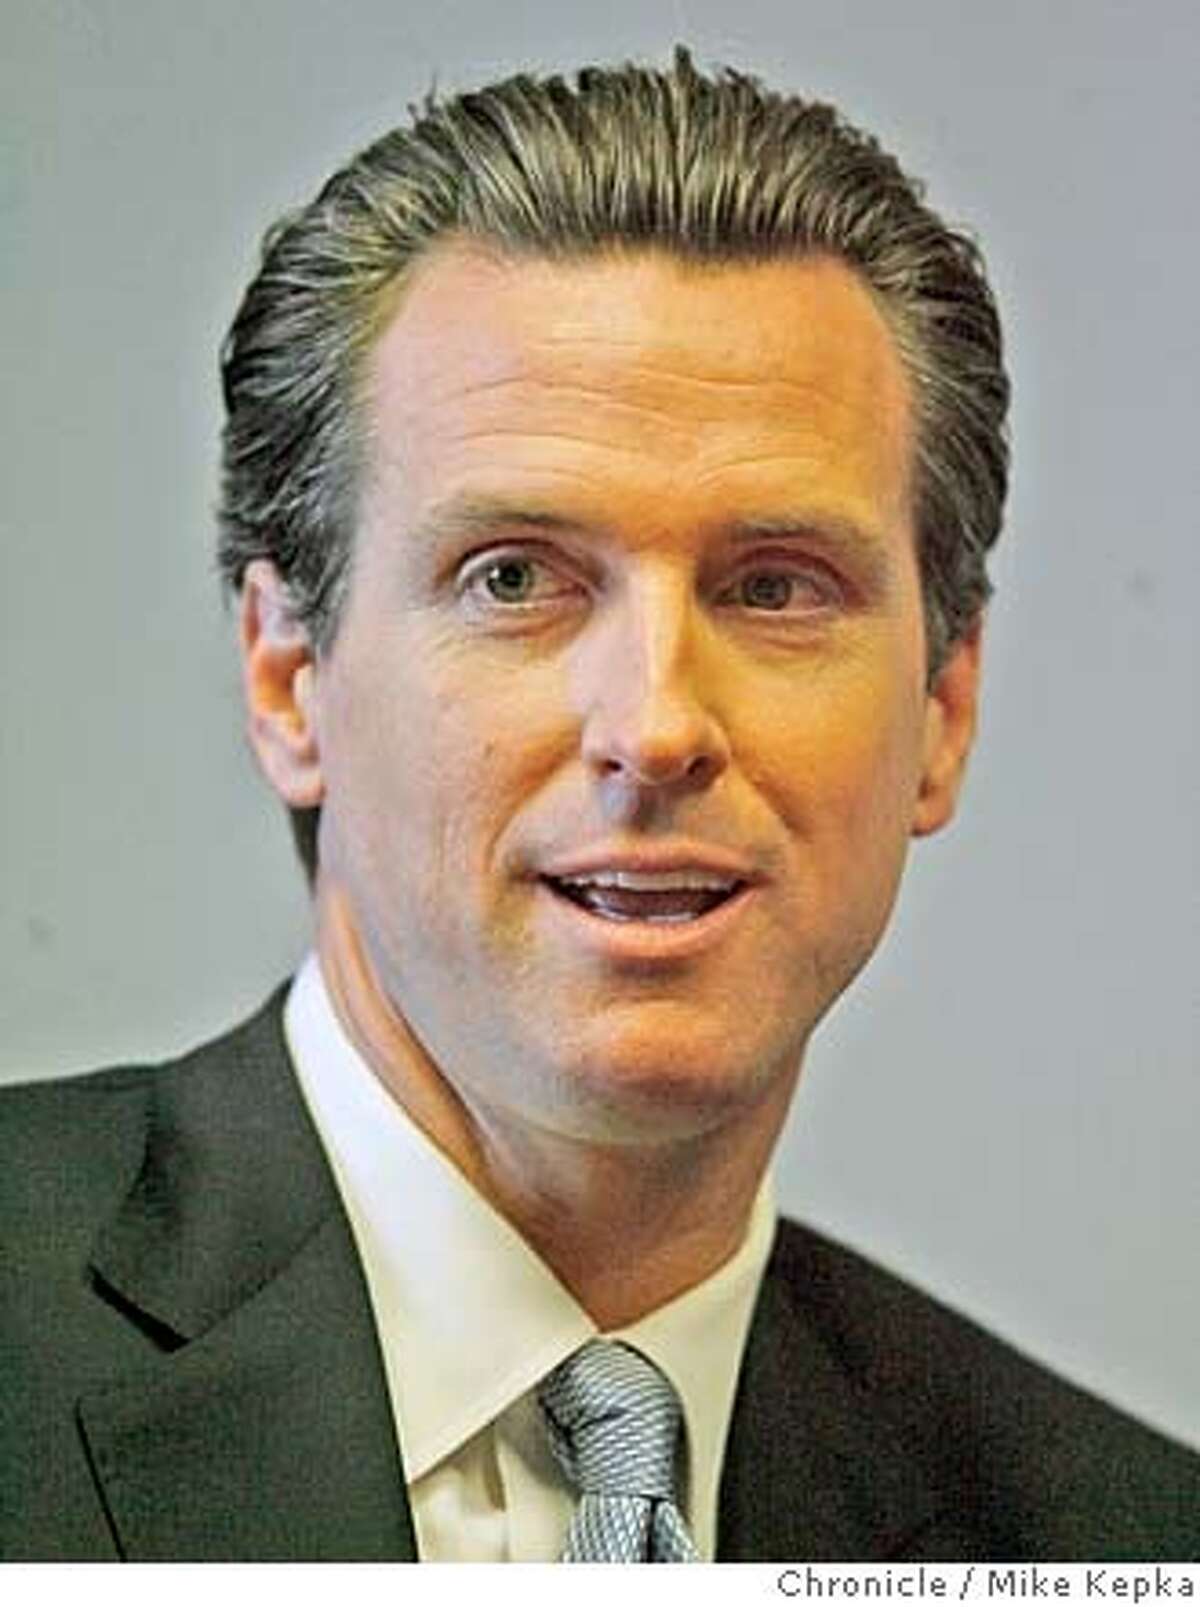 San Francisco Mayor Gavin Newsom meets with members of the San Francisco Chronicle's editorial board Thursday October, 18, 2007. Mike Kepka / The Chronicle Photo taken on 10/18/07, in San Francisco, CA, USA Ran on: 10-27-2007 San Francisco Mayor Gavin Newsom MANDATORY CREDIT FOR PHOTOG AND SAN FRANCISCO CHRONICLE/NO SALES-MAGS OUT